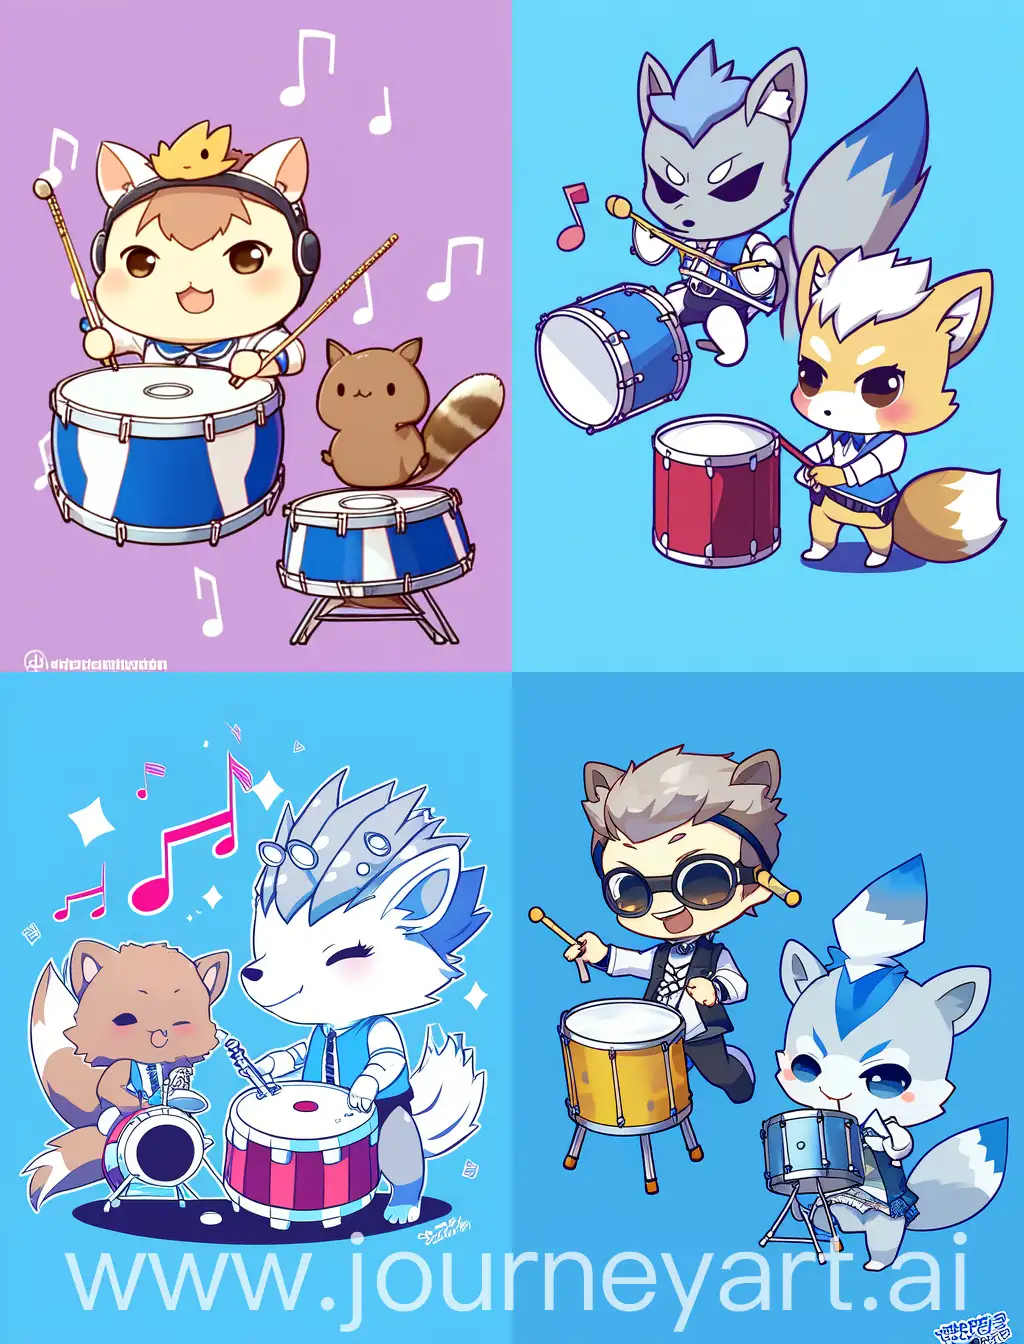 chibi squirrel and anime guy playing drums, with blue solid background, 